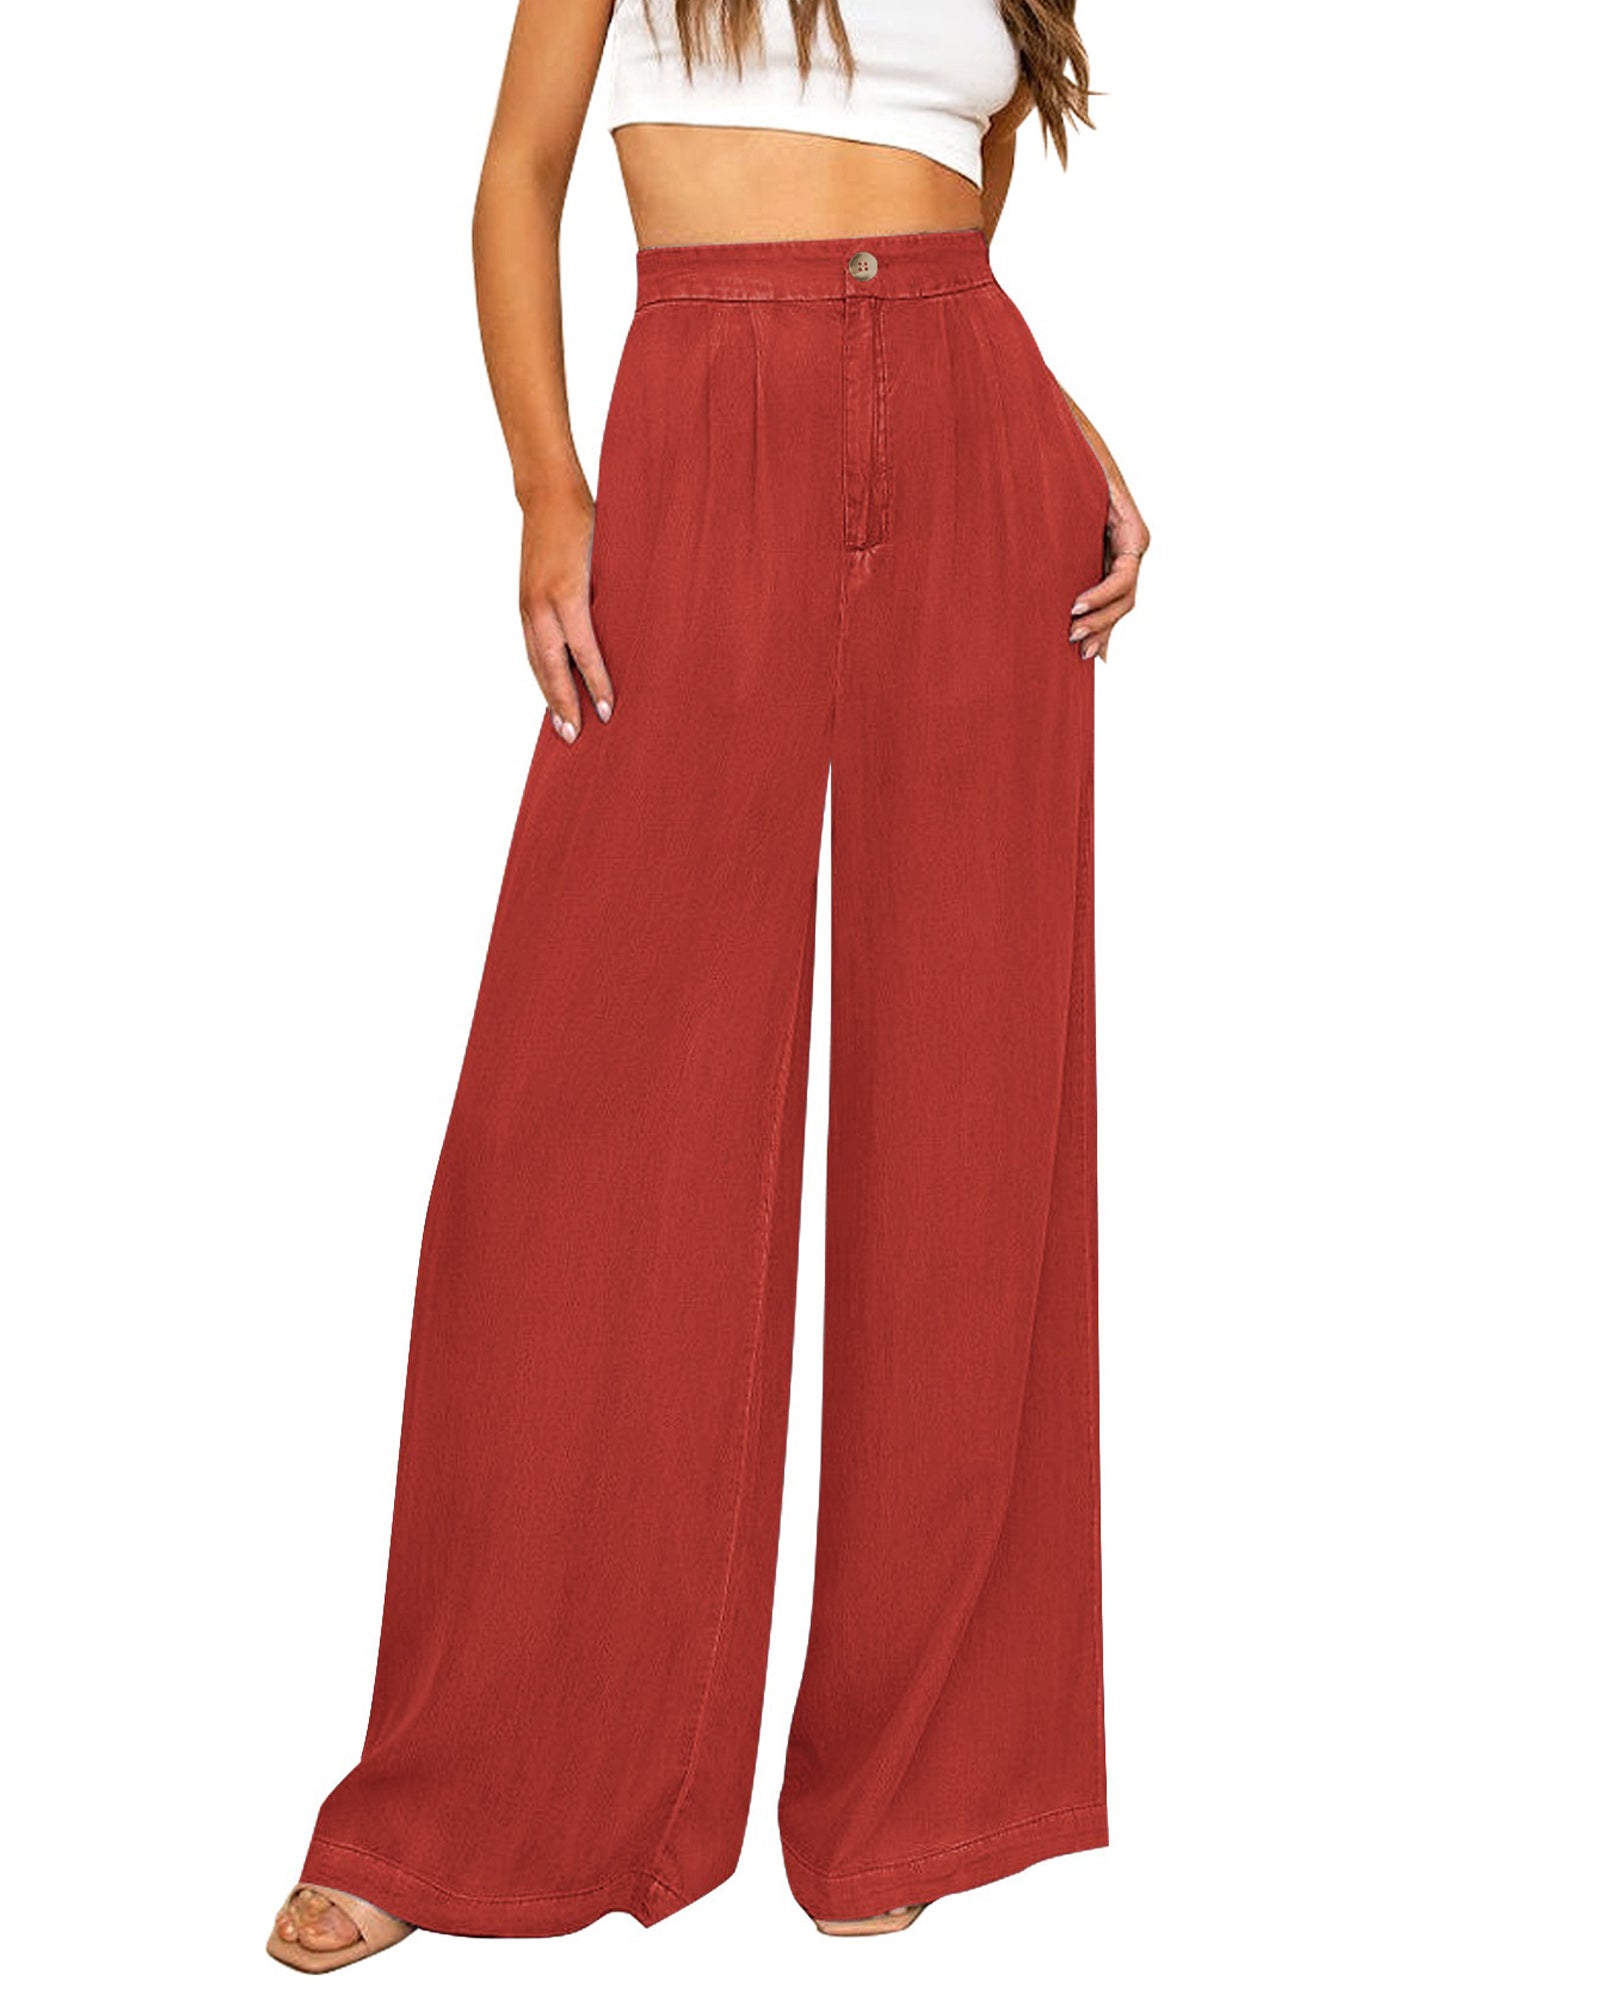 Buy Indian Palazzo Pants for Women at Offer Price